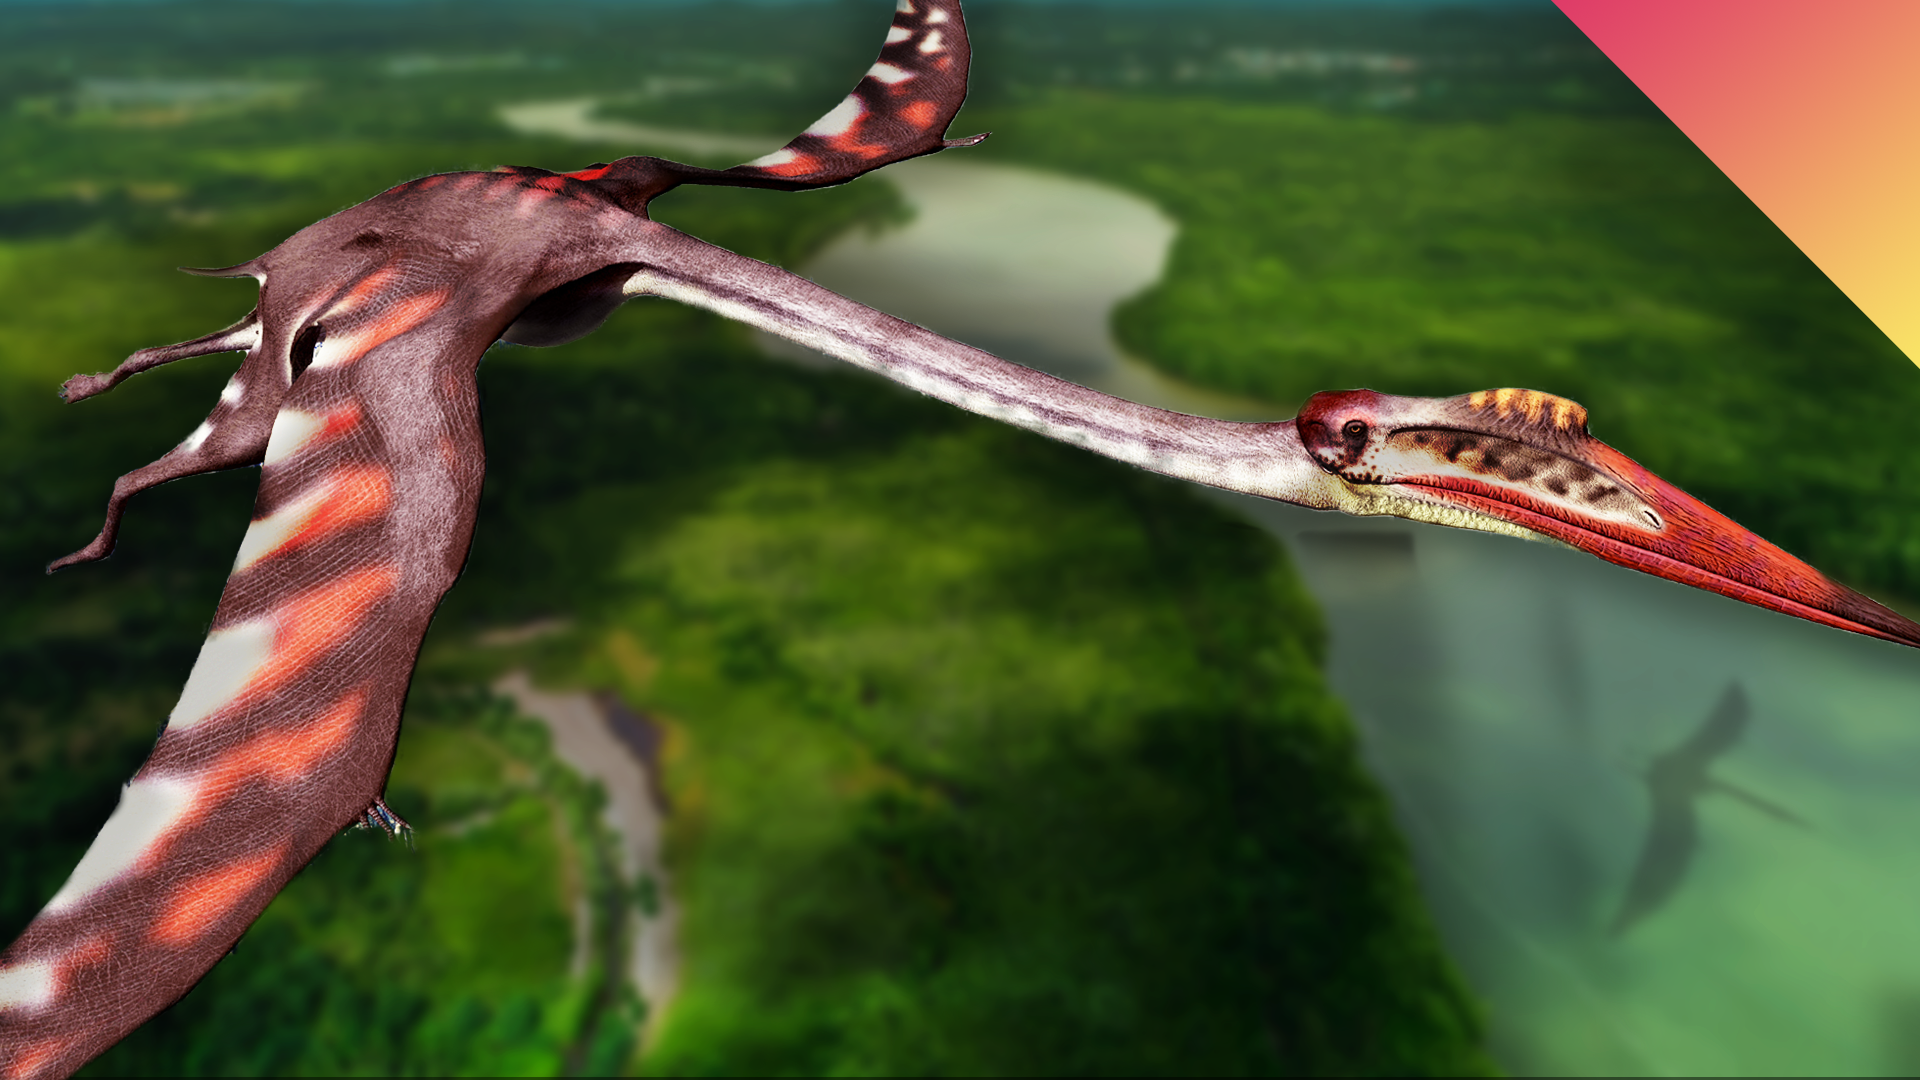 The largest pterosaurs have not been grounded yet